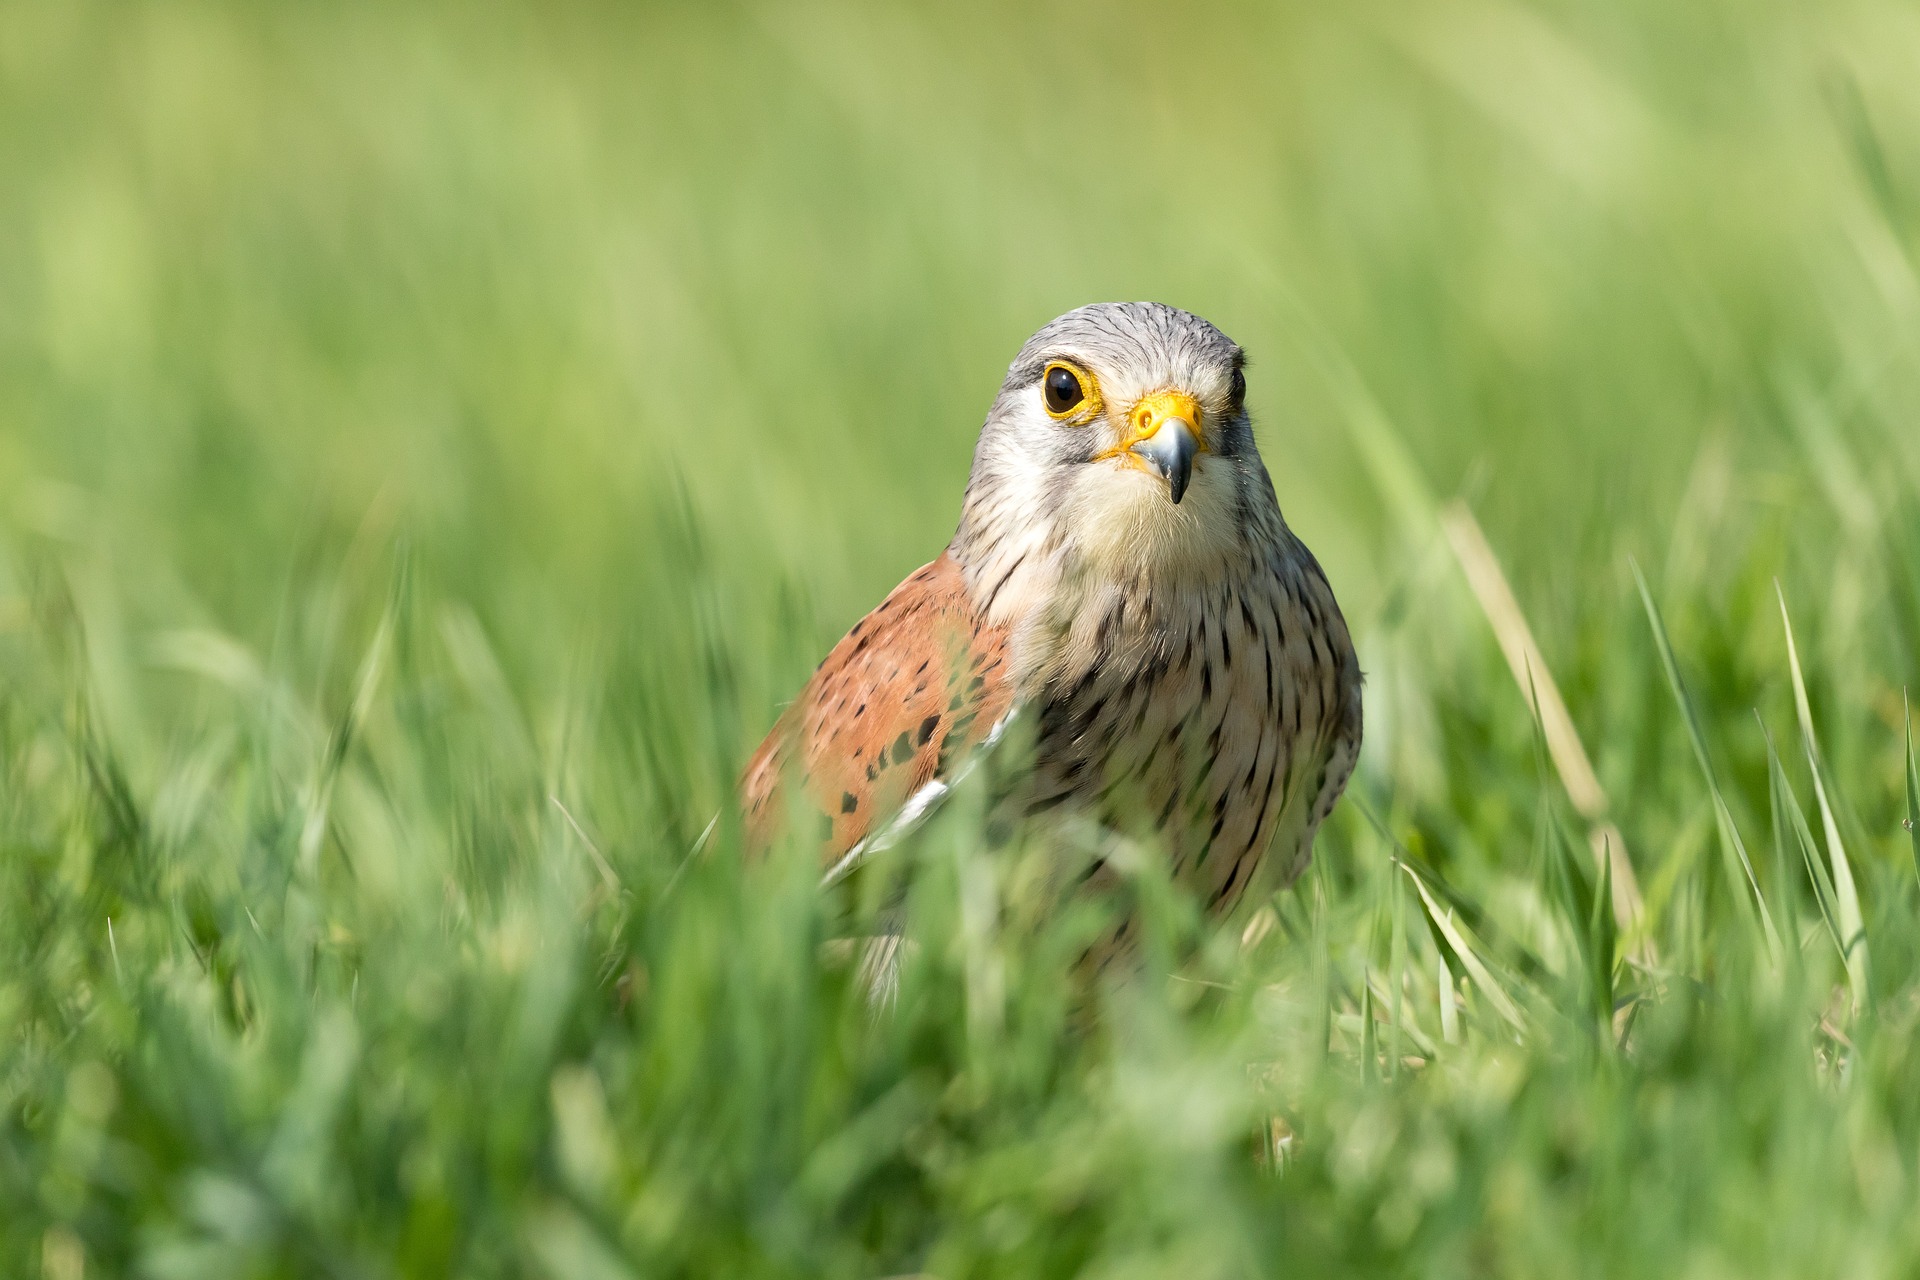 See kestrels and more when Sun Valley bird watching